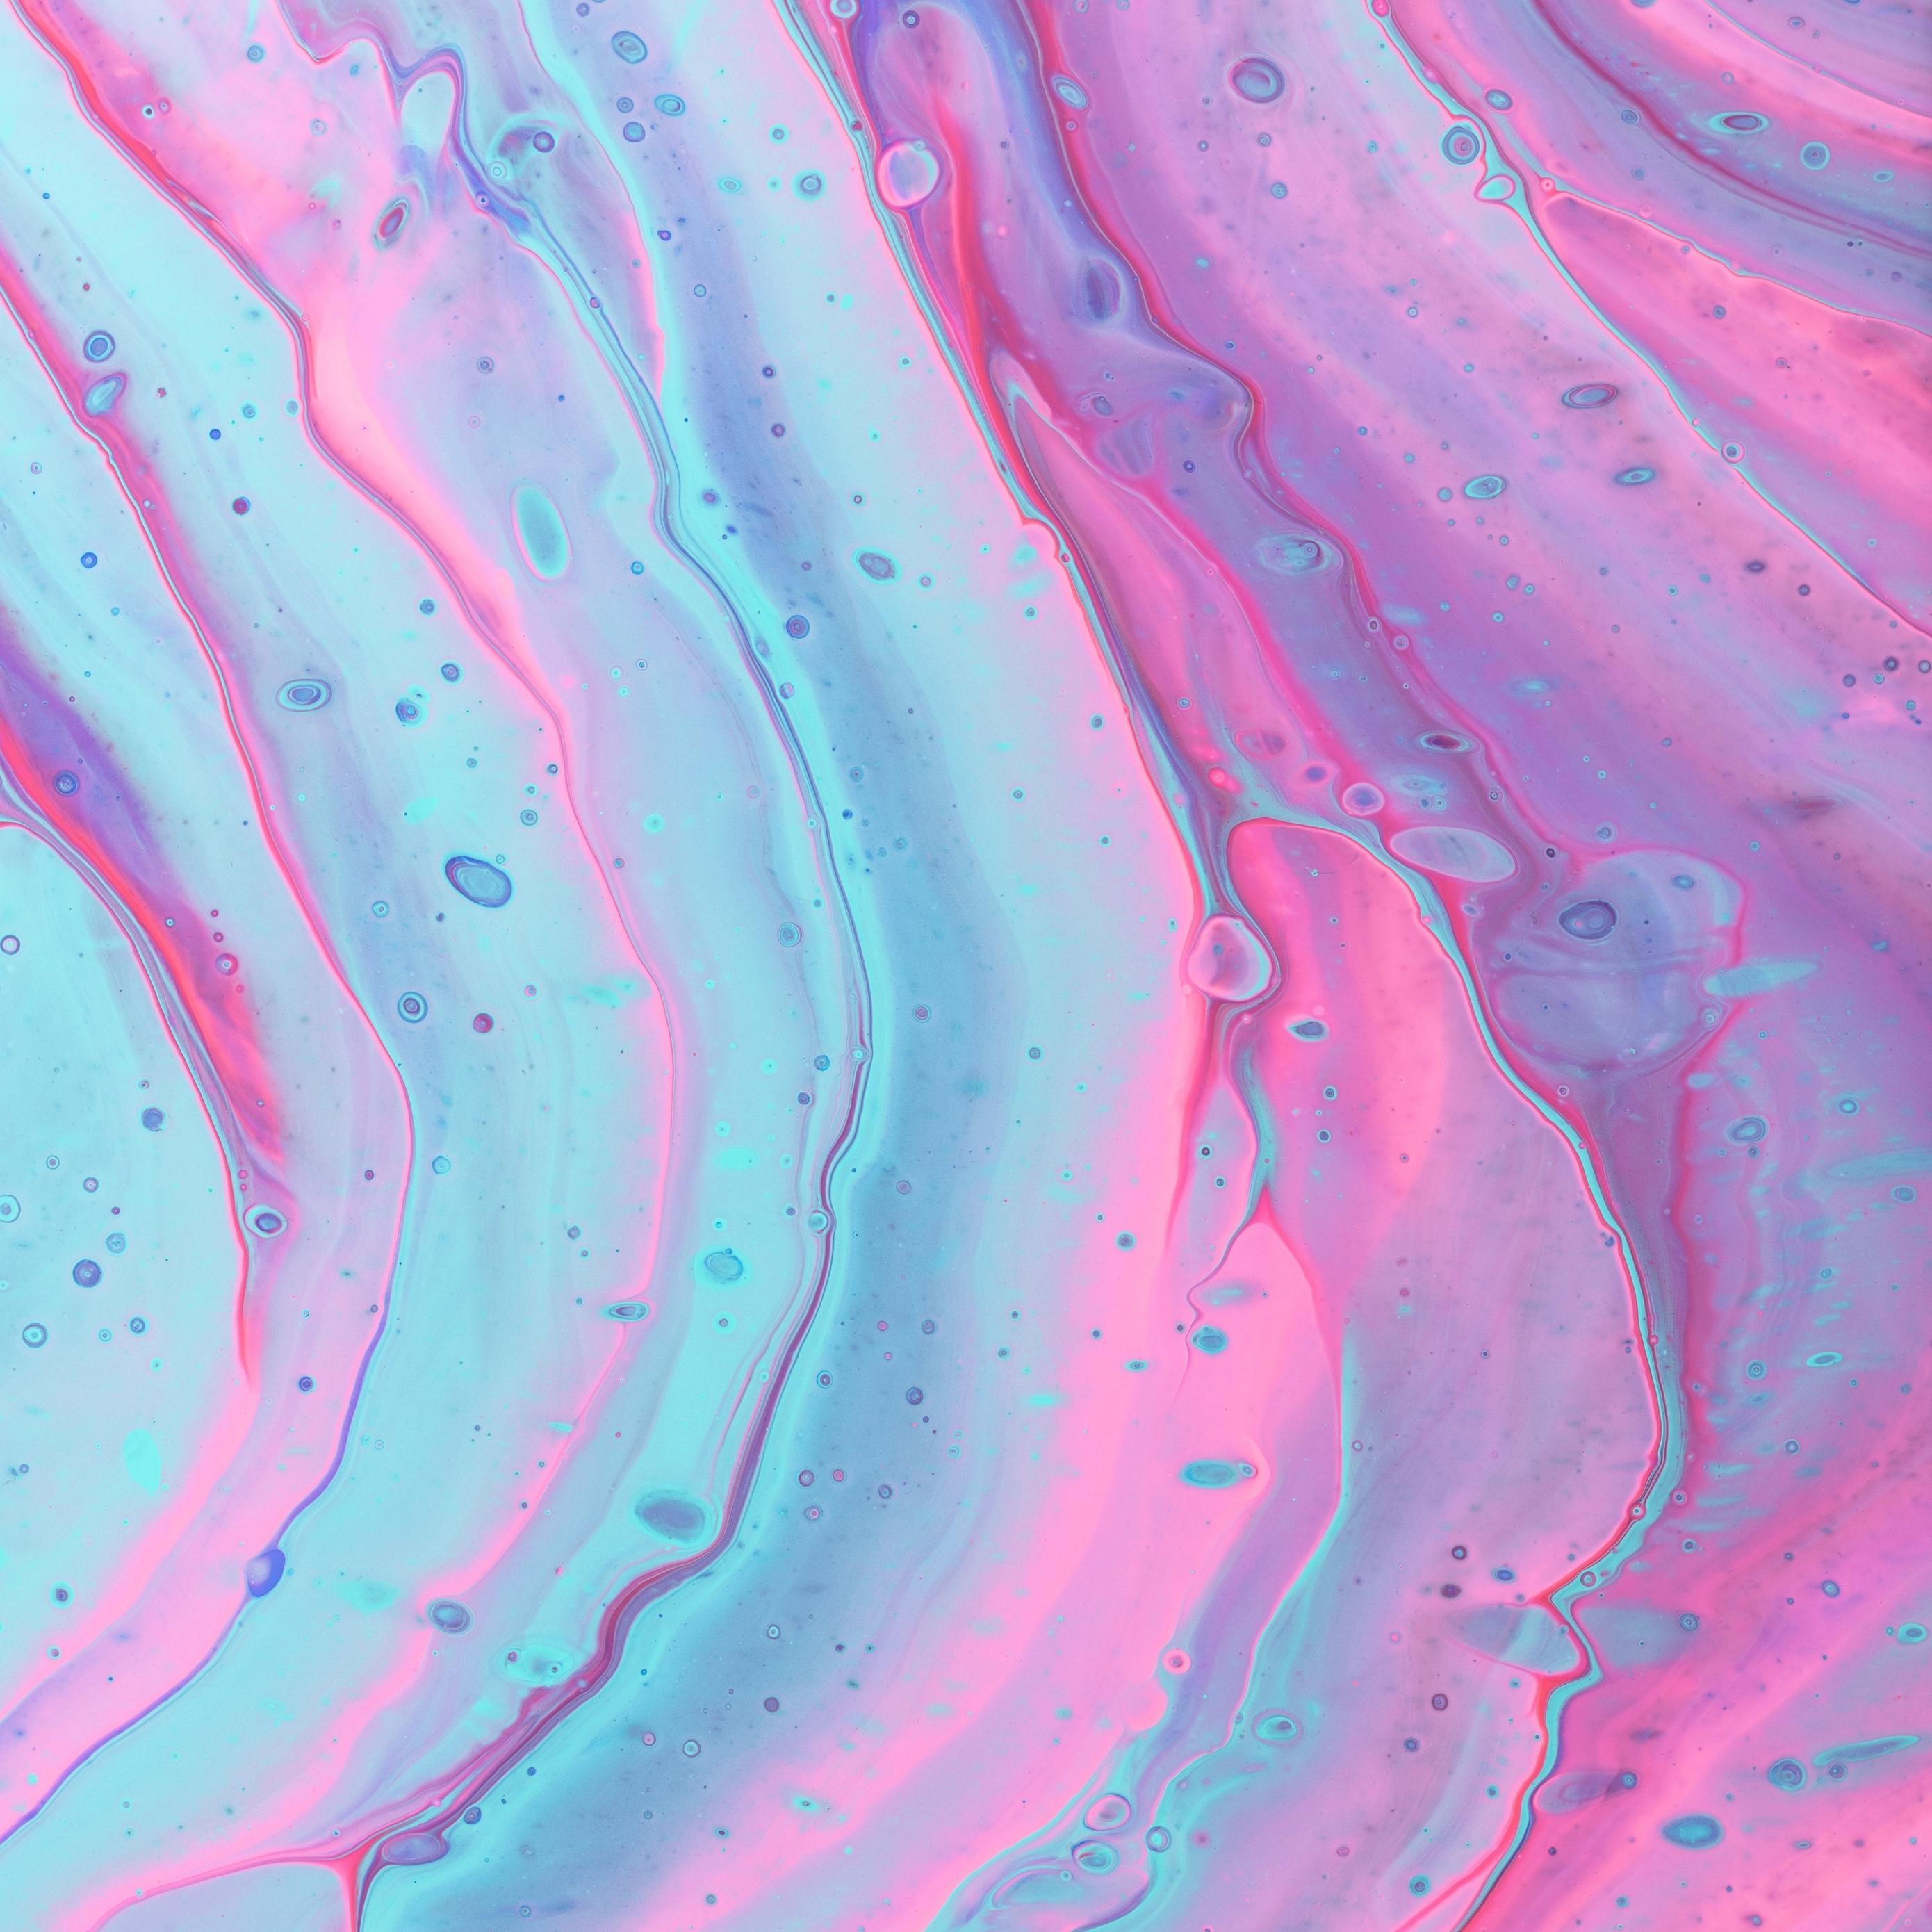 Download wallpaper 2780x2780 paint, stains, pink, blue ipad air